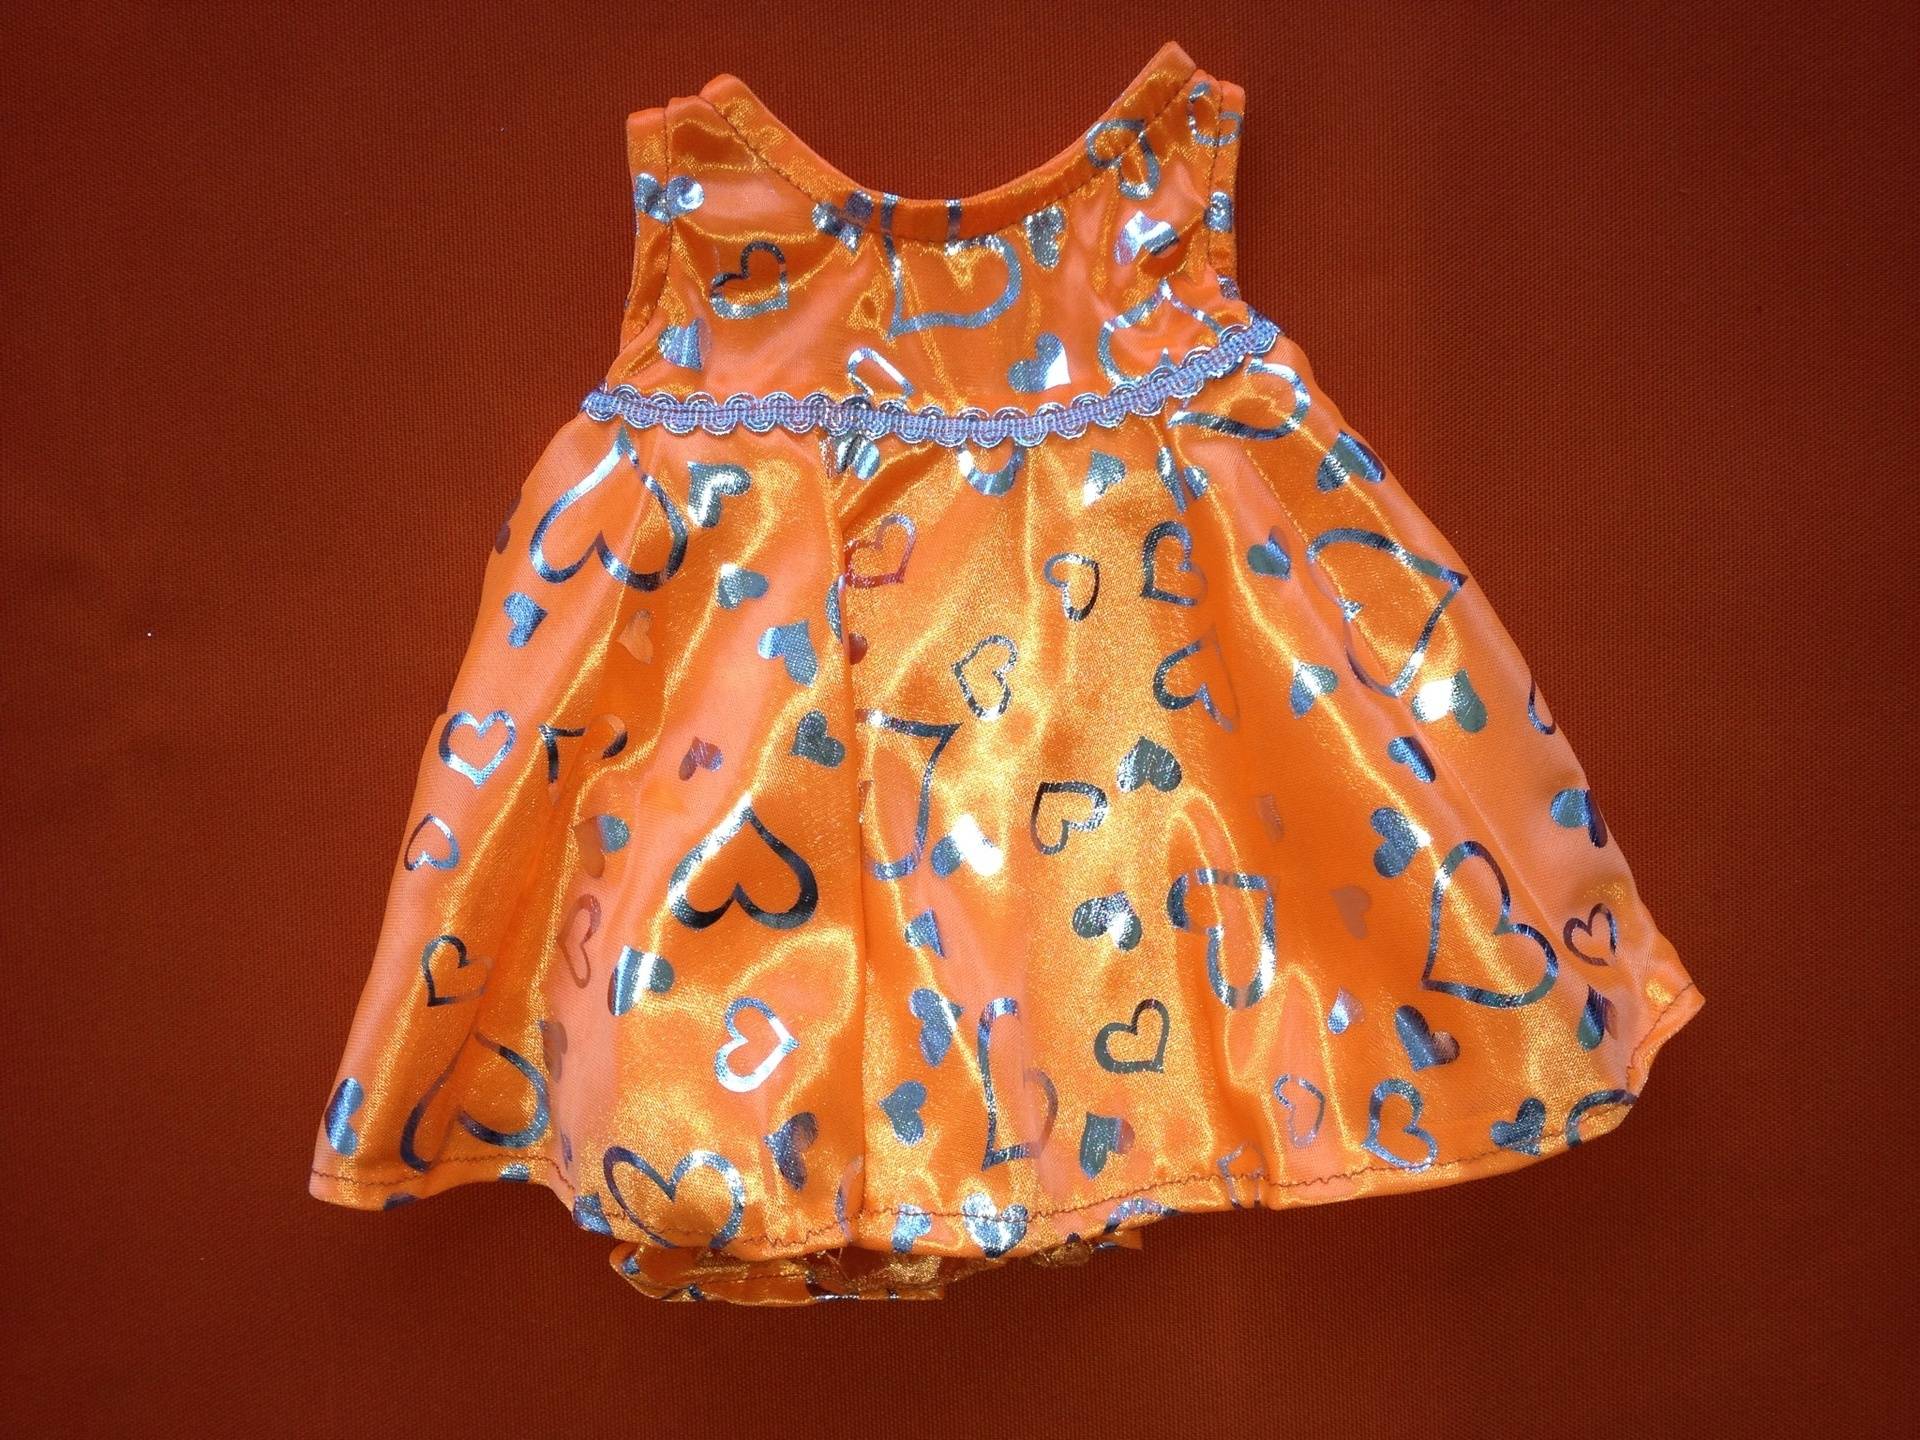 Orange shimmer dress for a  for a girls birthday party